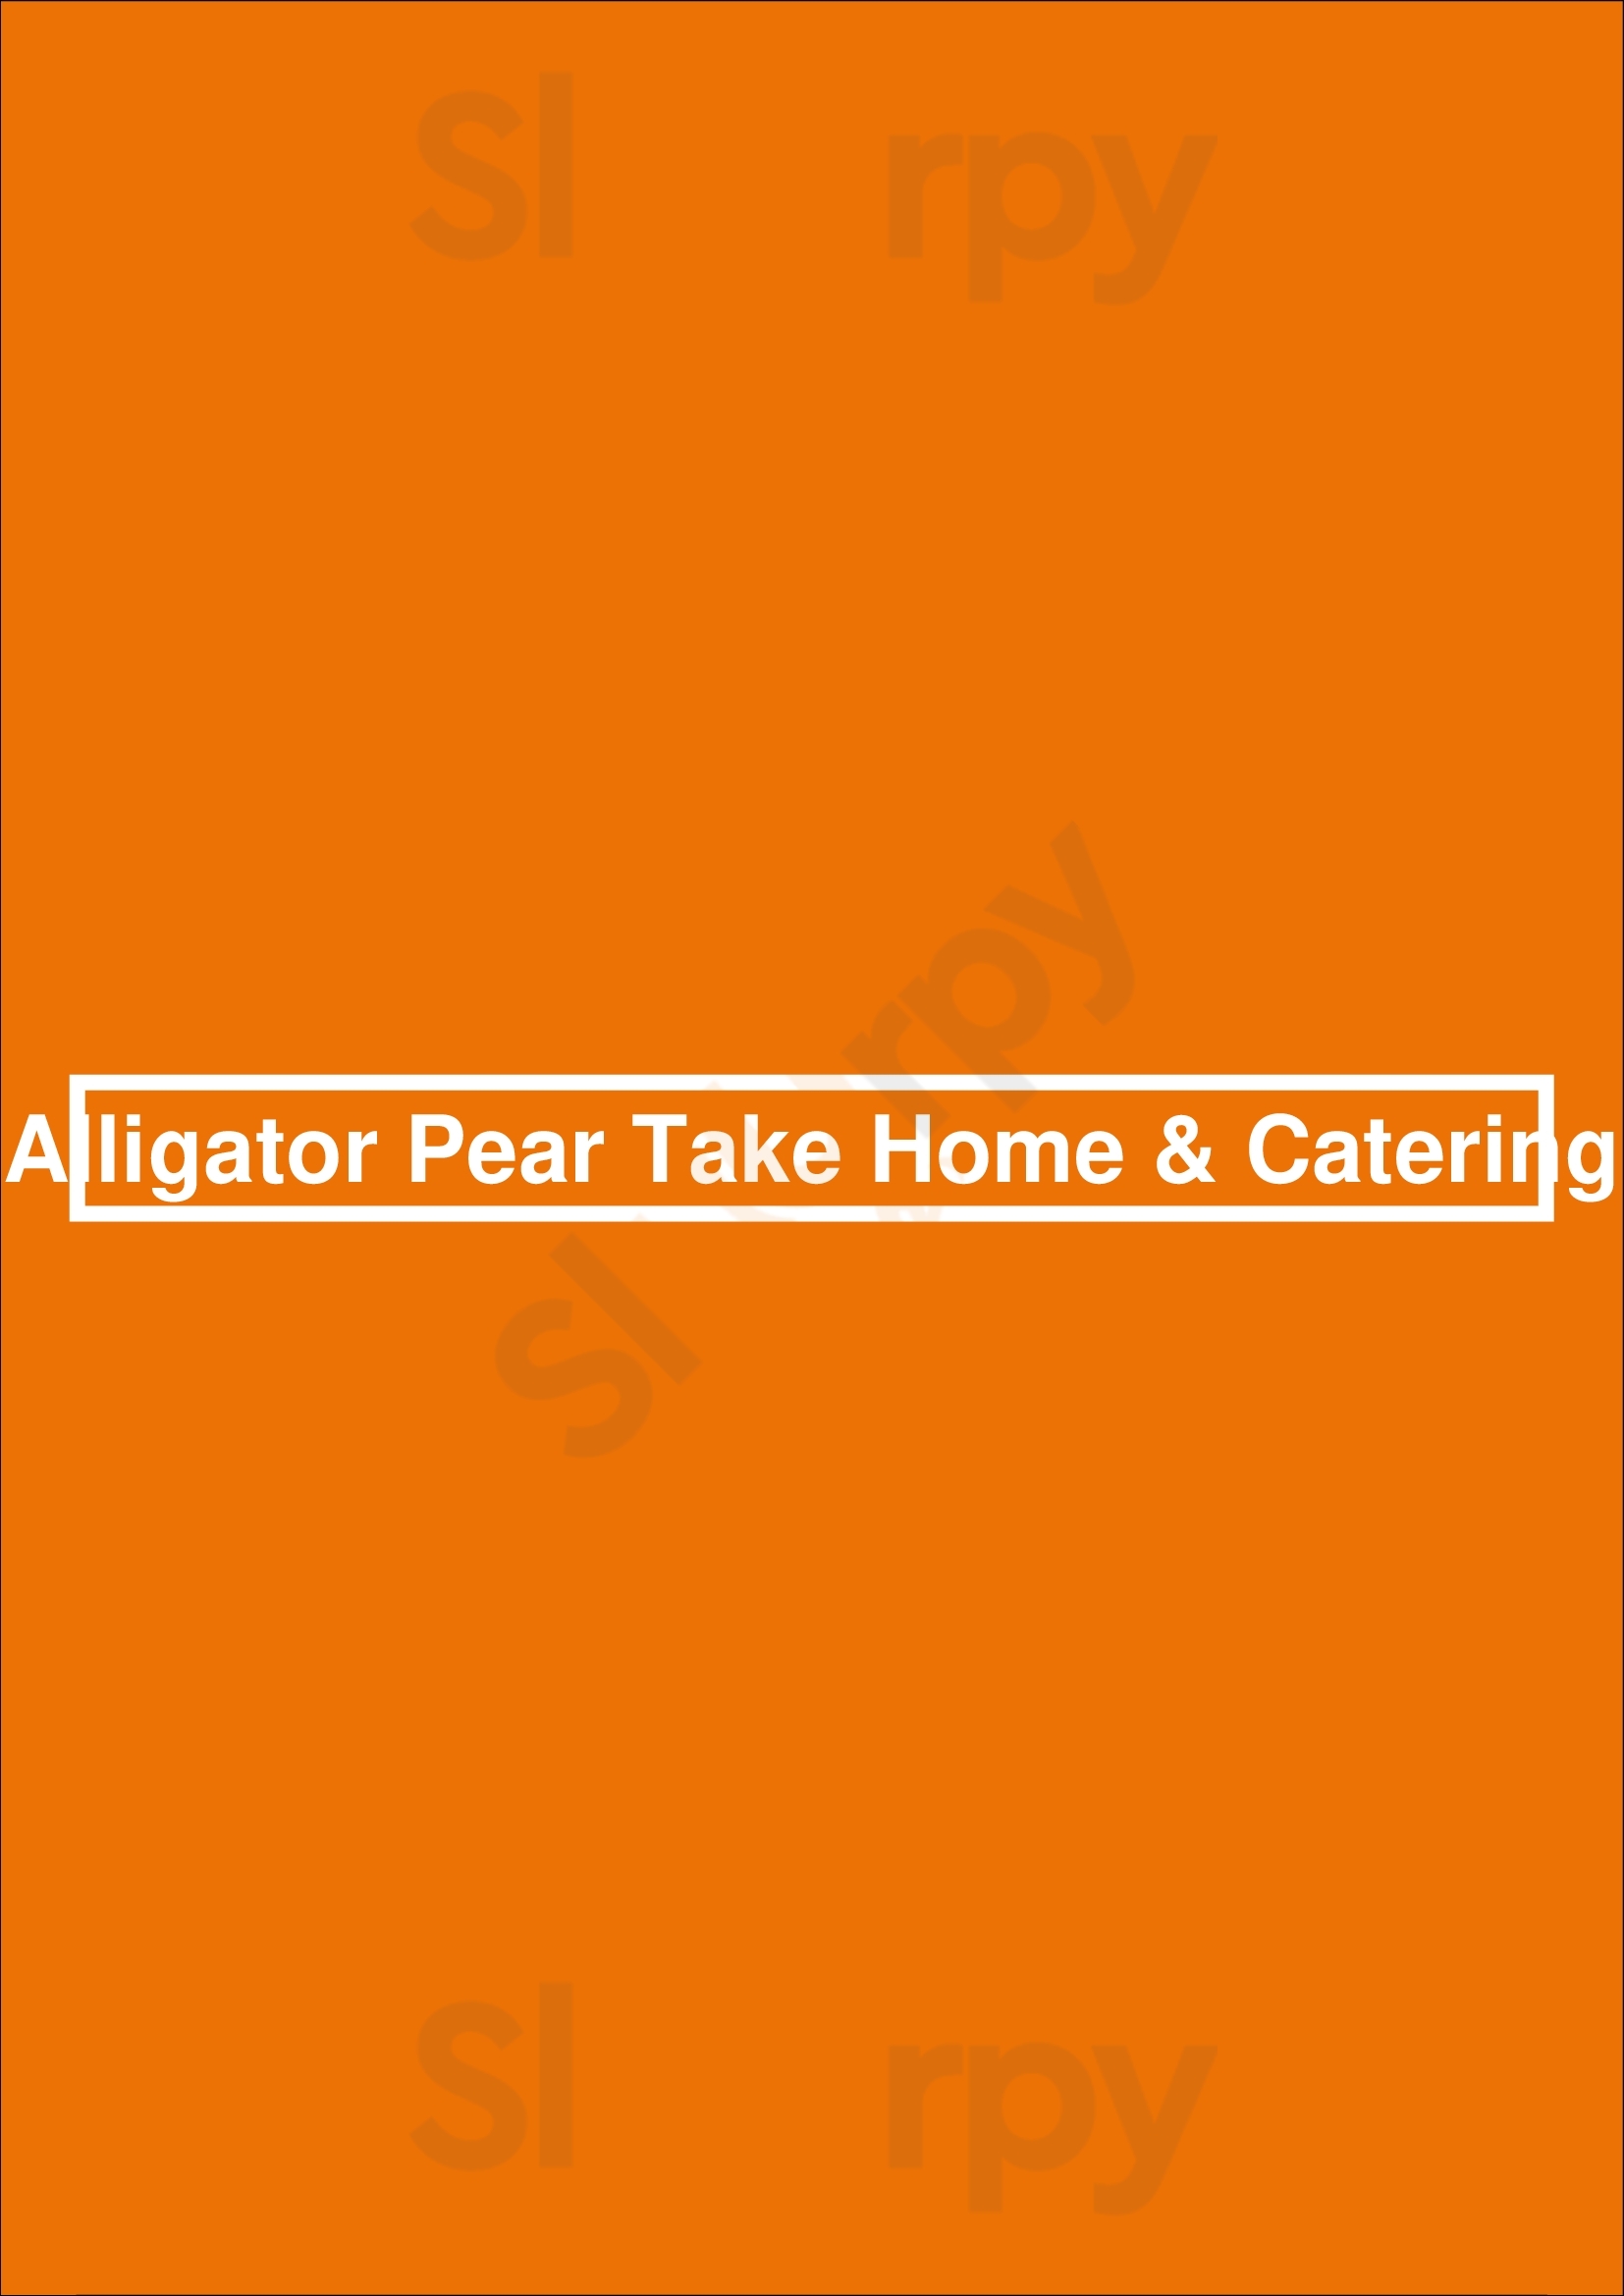 Alligator Pear Take Home & Catering St. Catharines Menu - 1